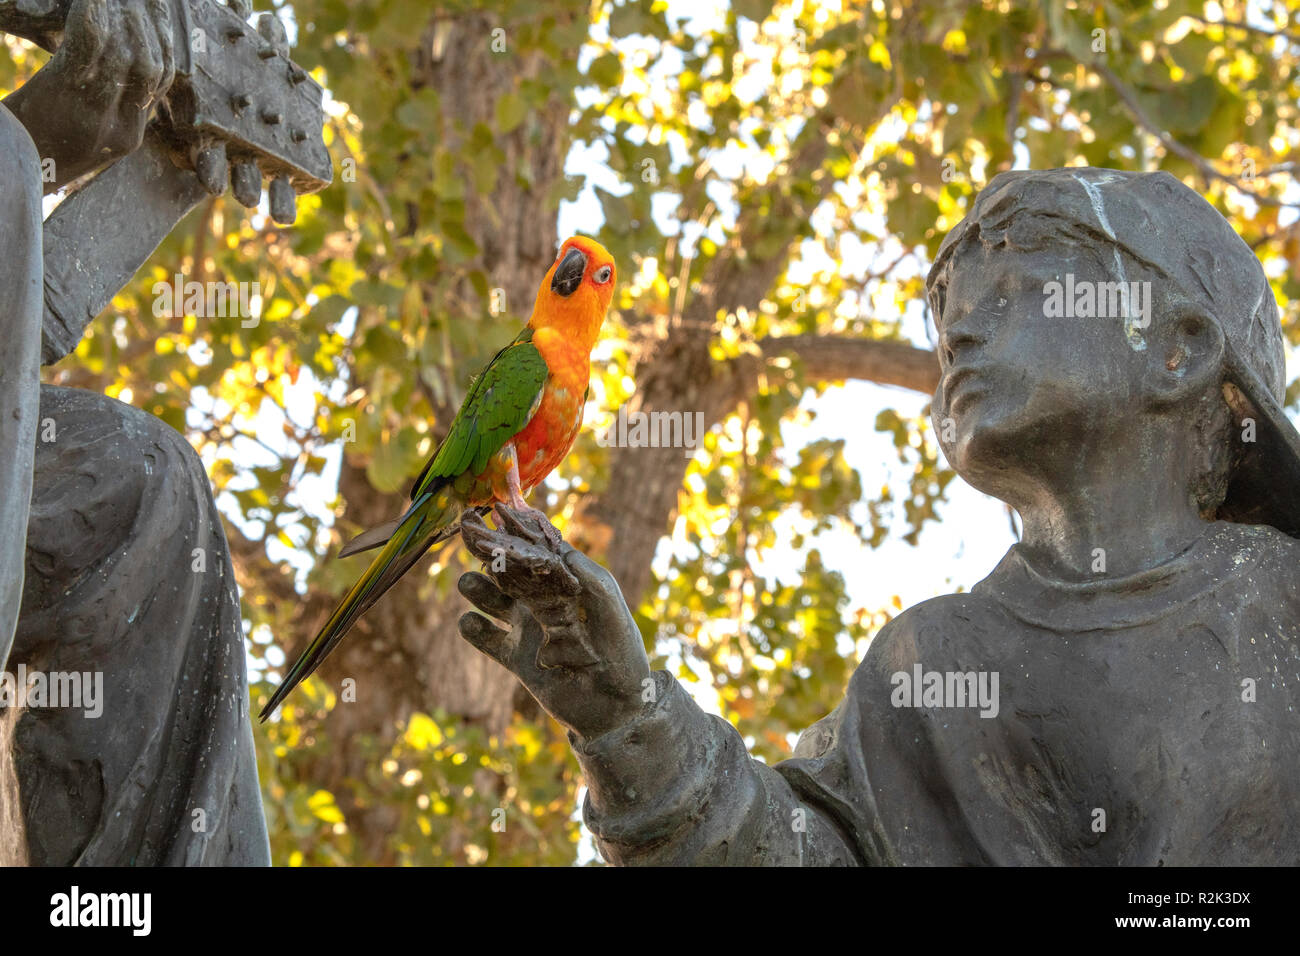 BOSSIER CITY, LA., U.S.A. - NOV. 16, 2018: A Jenday Conure, Aratinga jandaya, poses on a park statue on the Red River Waterway. Stock Photo